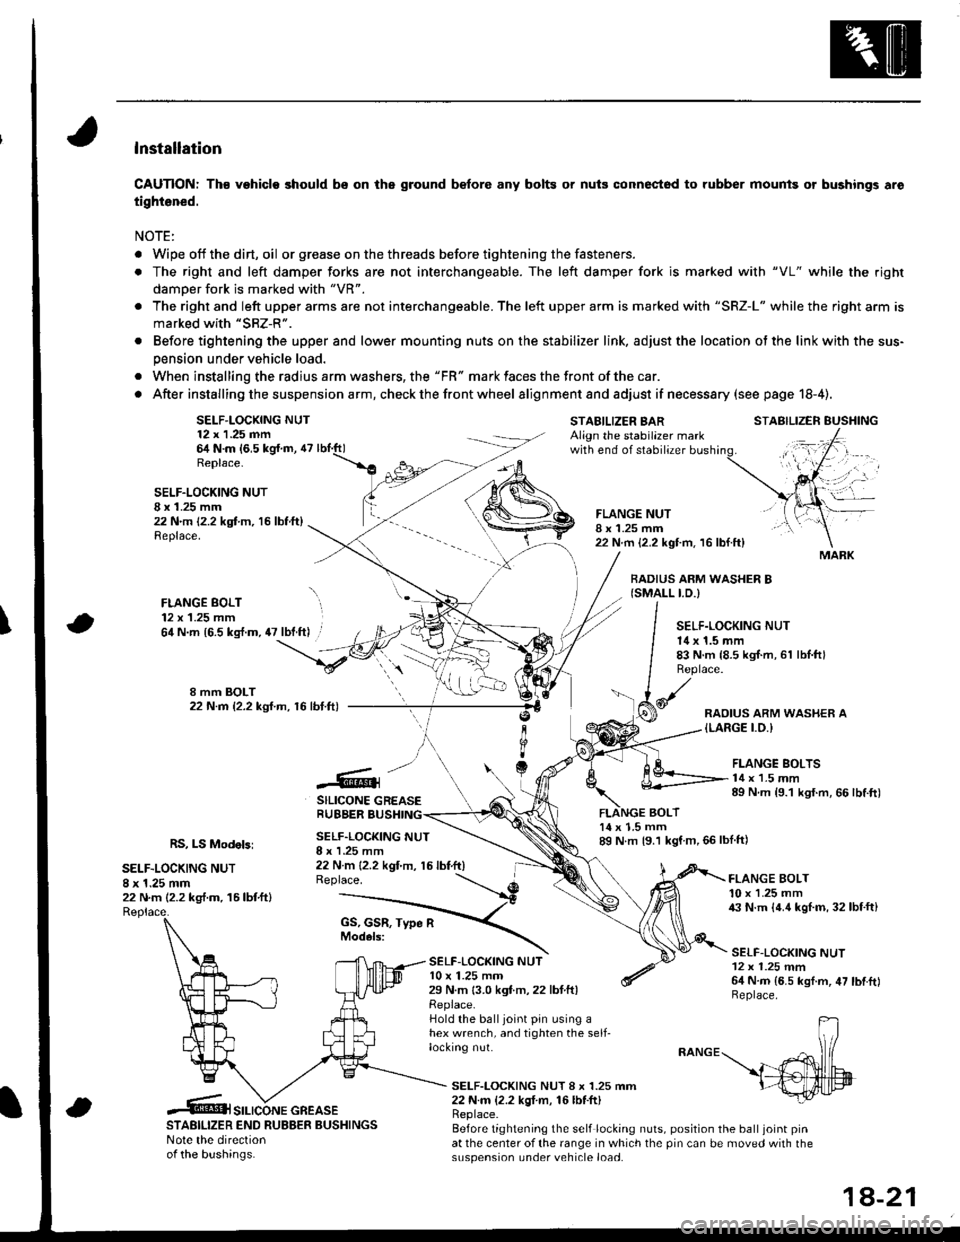 HONDA INTEGRA 1998 4.G Workshop Manual lnstallation
CAUTION: Th€ vehiclo should bs on the ground b€fore any bolts or nuis connectod to rubber mounis or bushings aro
tightened.
NOTE:
. Wipe off thedirt,oil or gr€ase on the threads bef